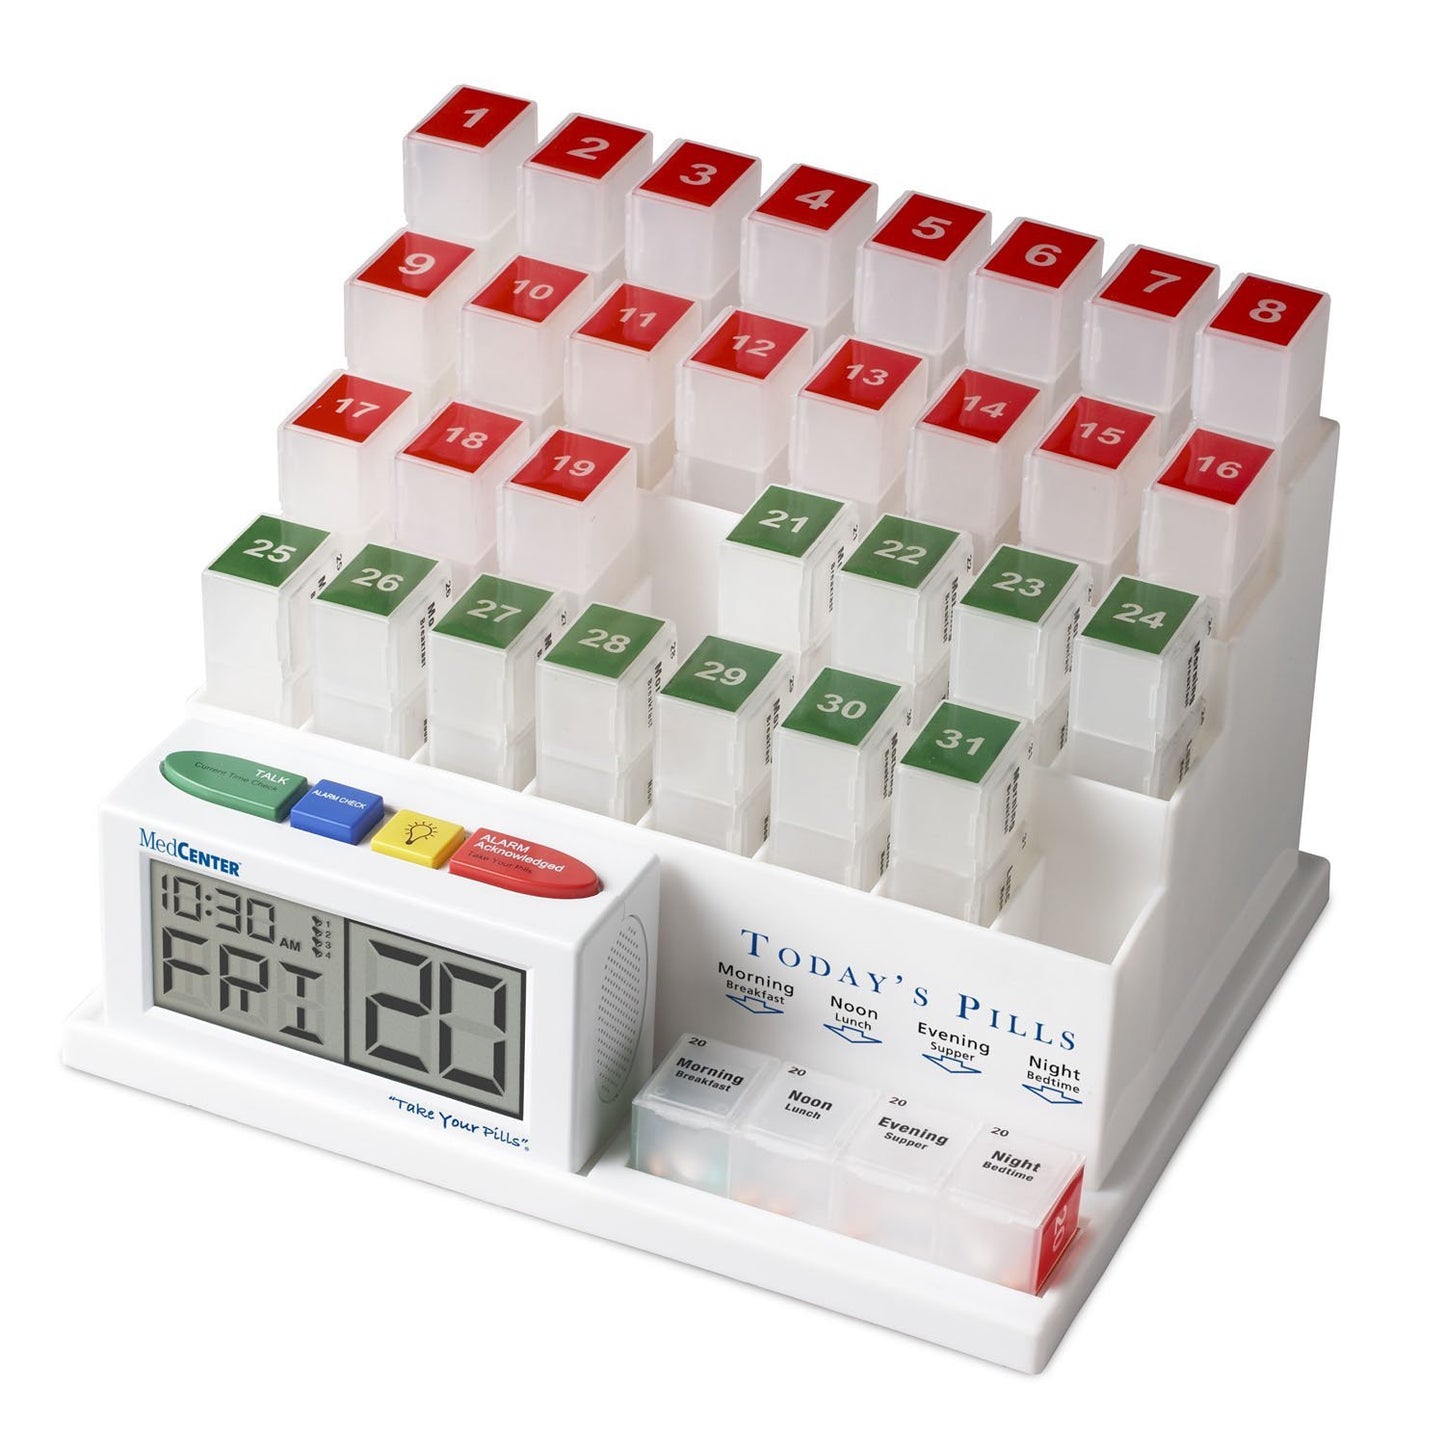 A high tech pill organizer that is tiered like bleachers. There are spots for 31 days of the month and an alarm clock to remind you to take you pills